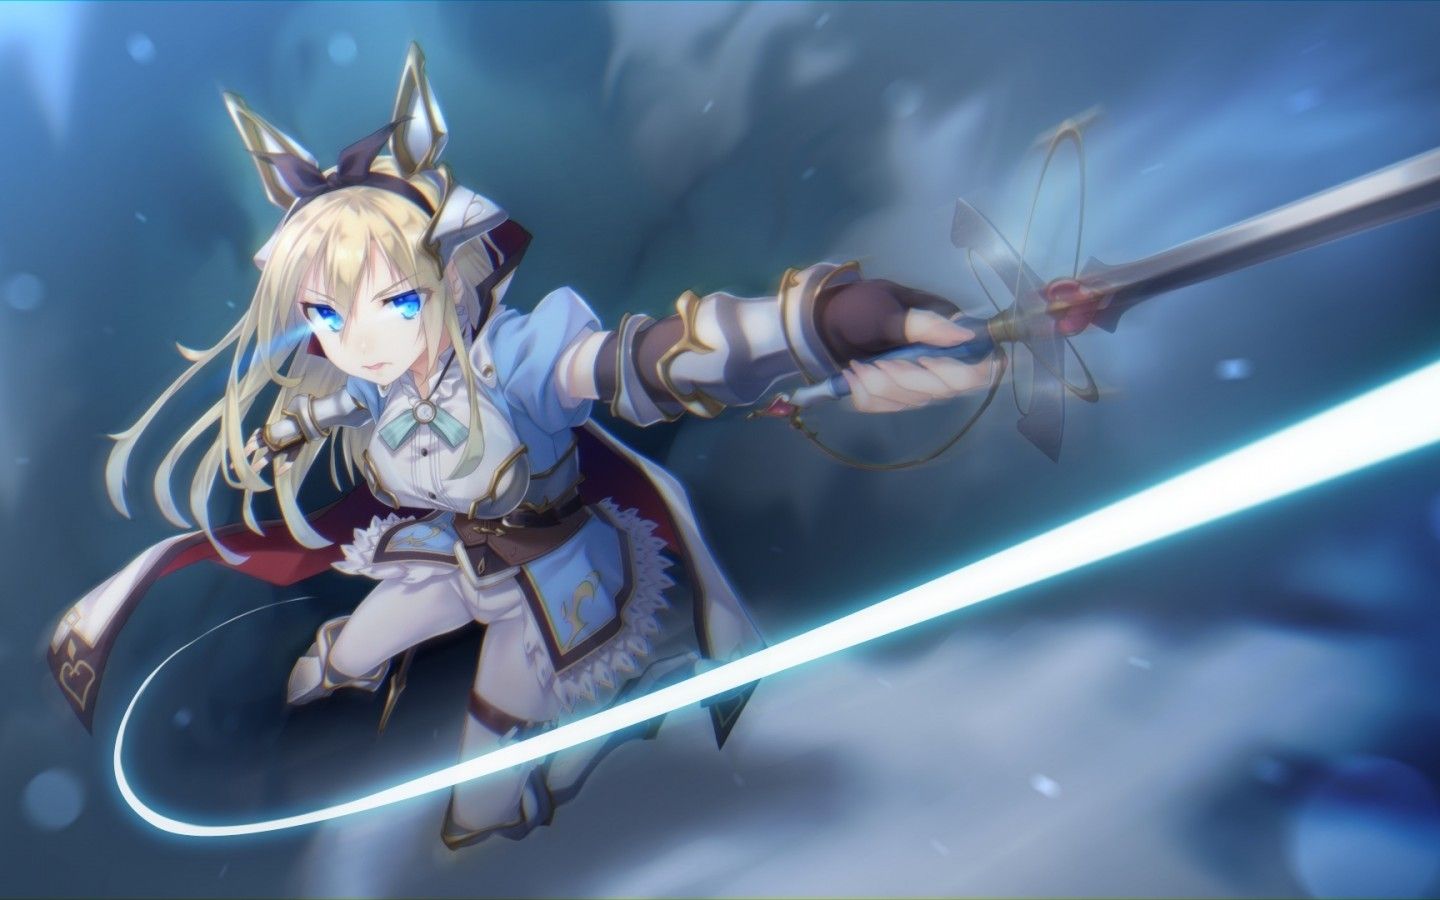 Download 1440x900 Anime Girl, Blonde, Sword, Ribbon, Blue Eyes, Fighting Wallpaper for MacBook Pro 15 inch, MacBook Air 13 inch